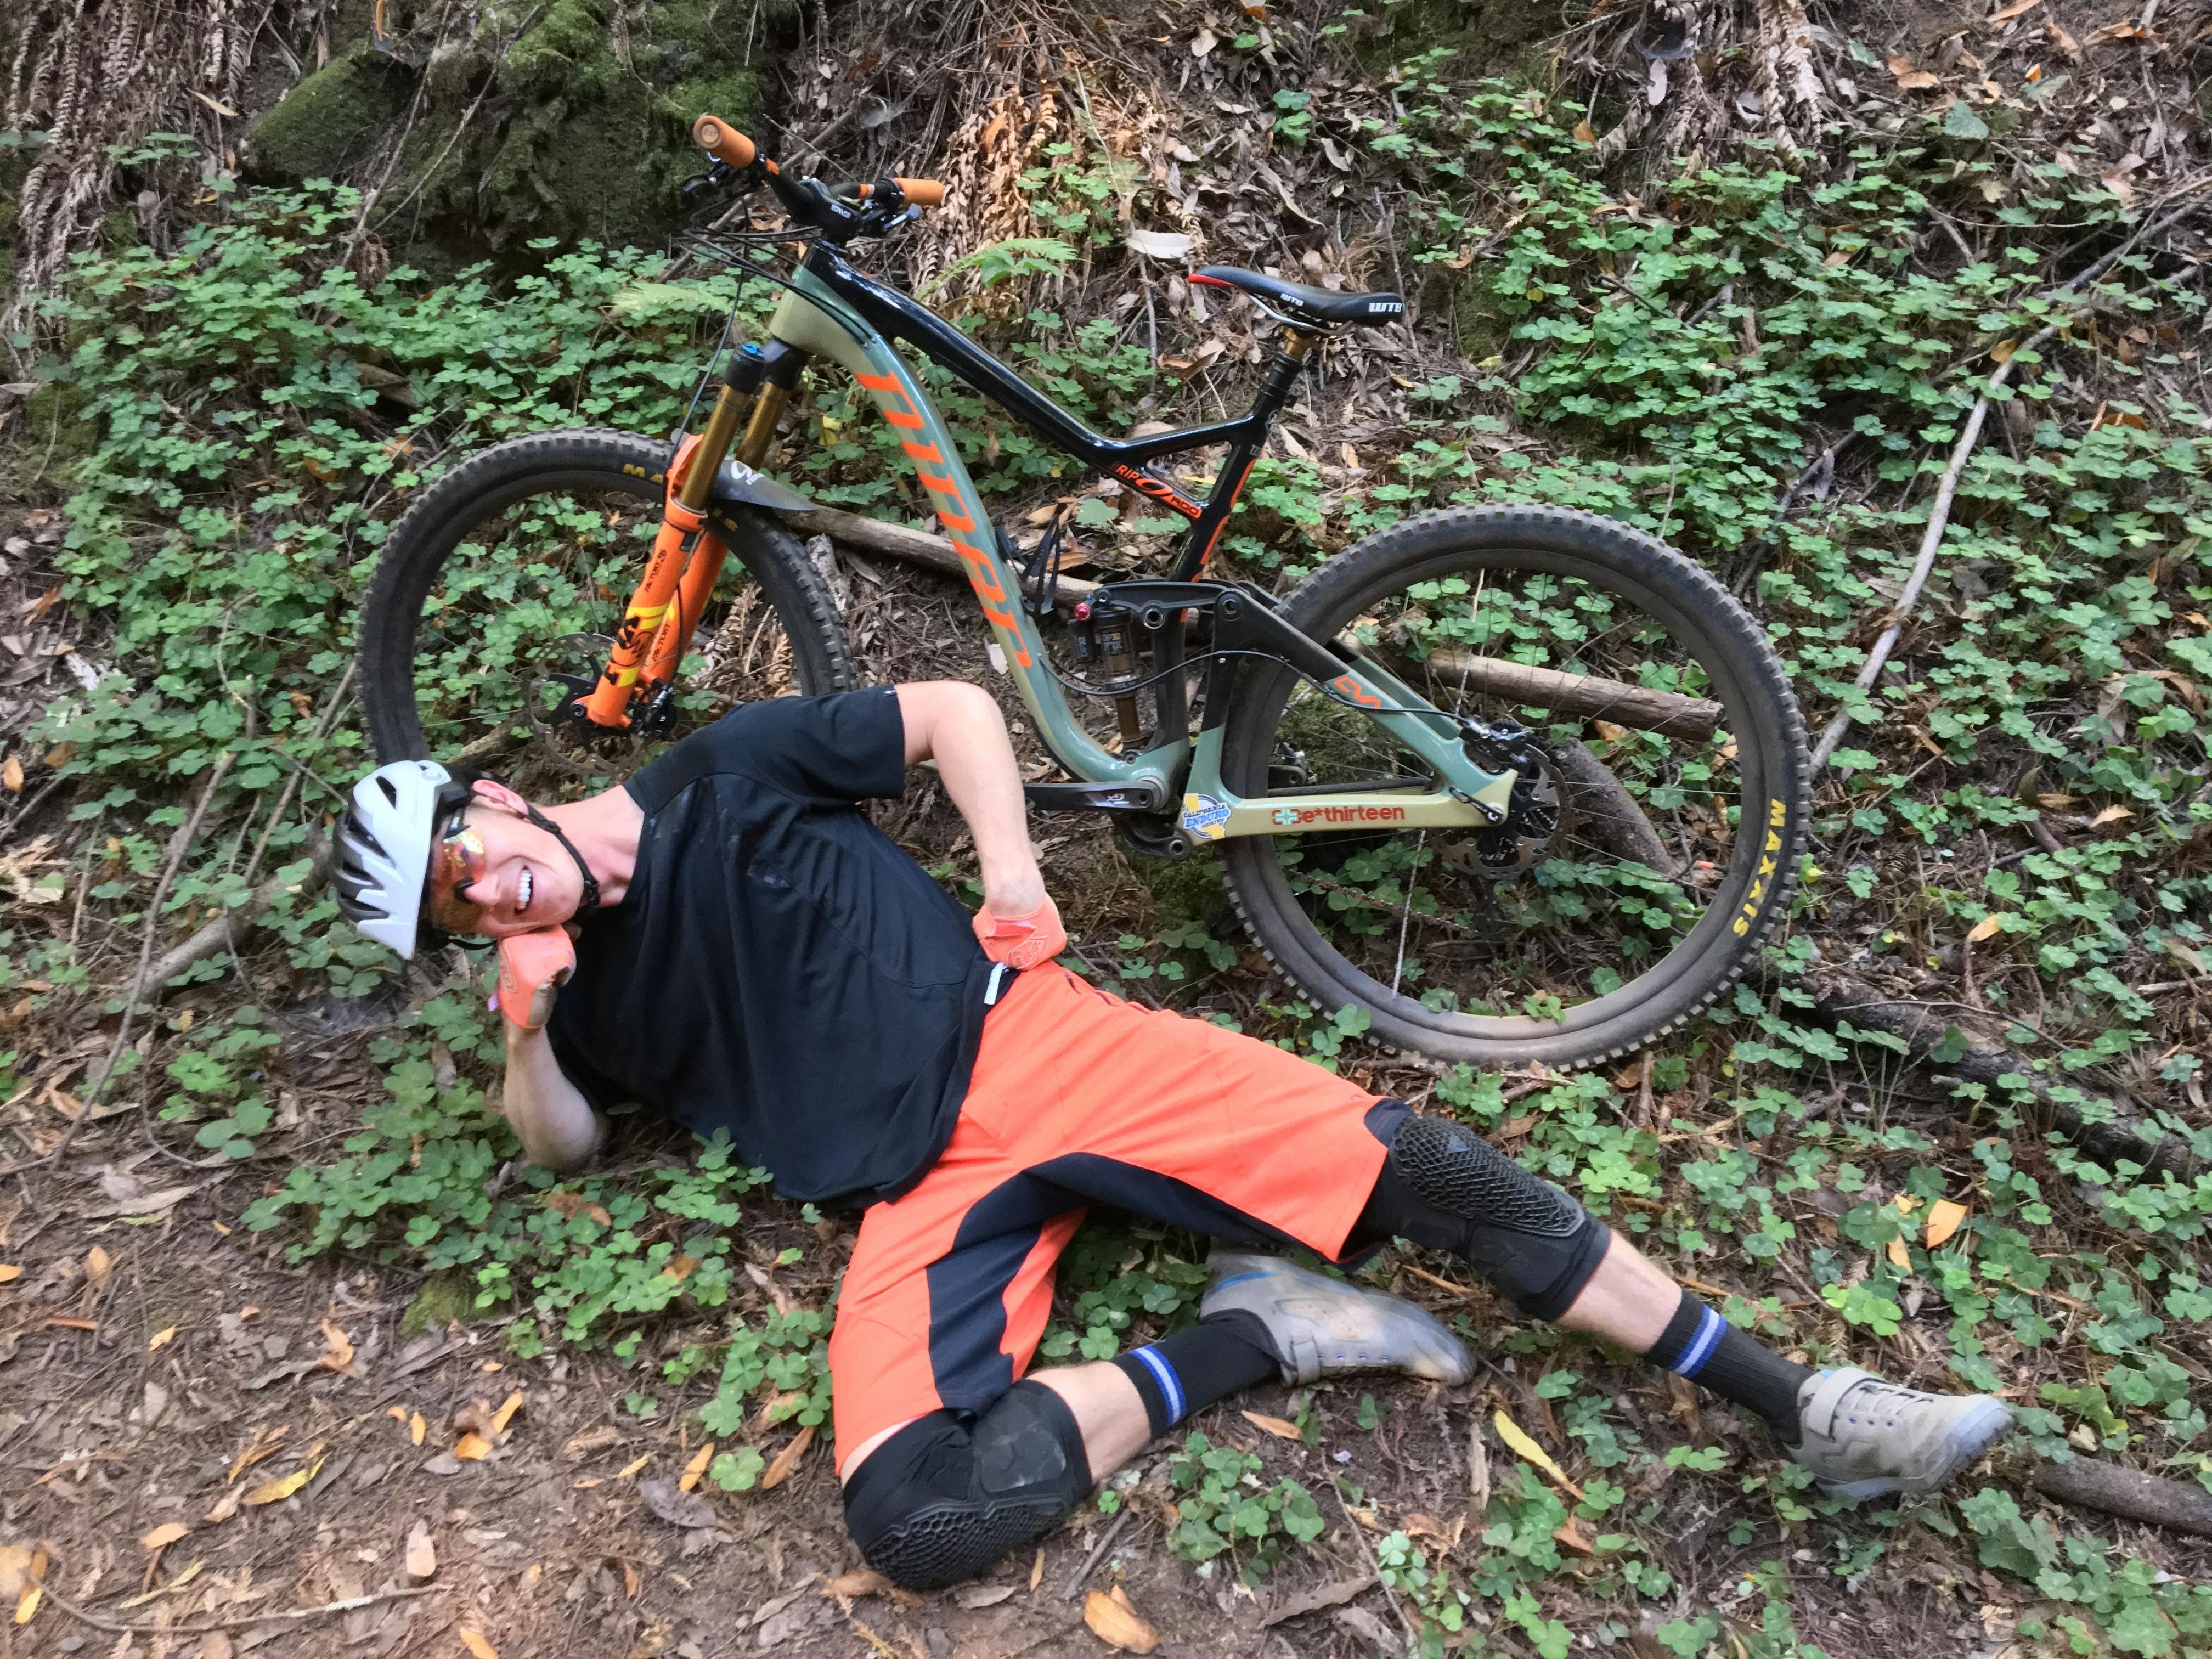 Curated expert Mitch Harnett lounging on the ground in front of his mountain bike in the forest